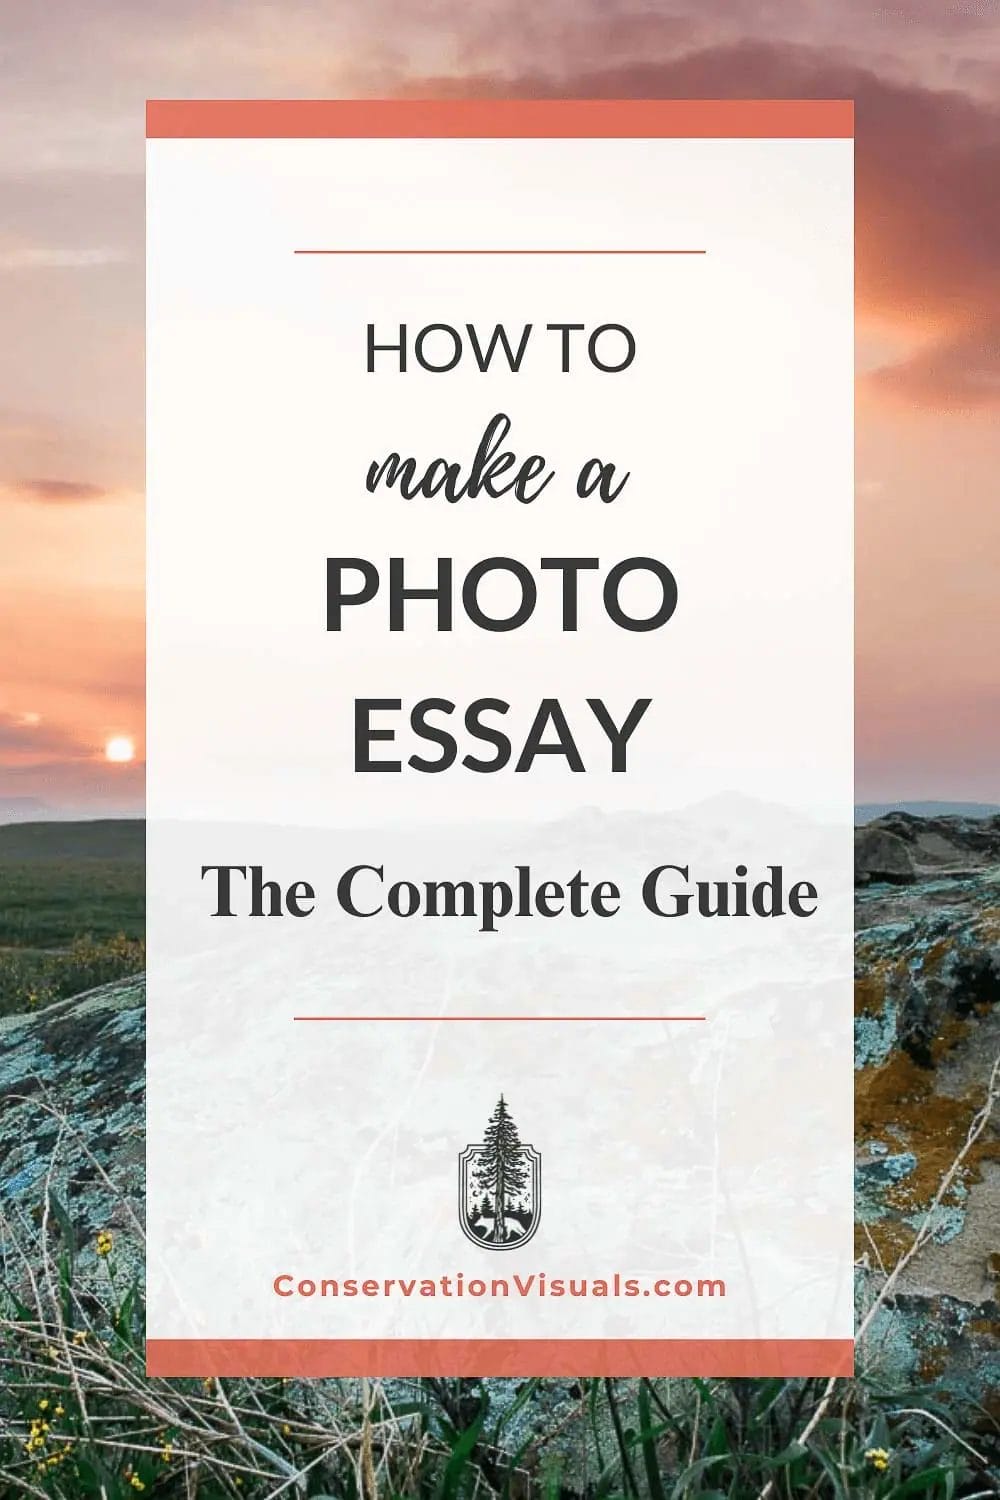 format for photo essay